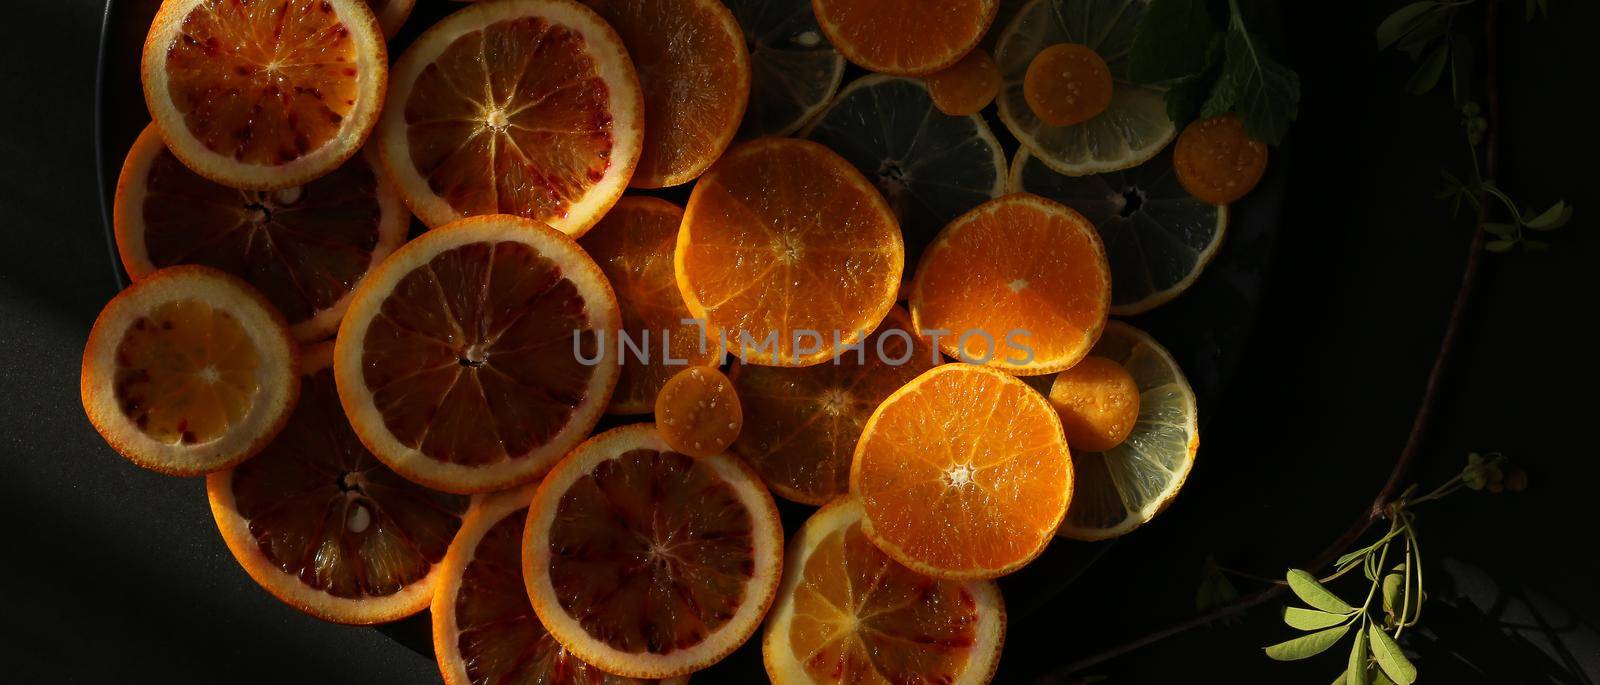 Citrus fruits collection by NelliPolk